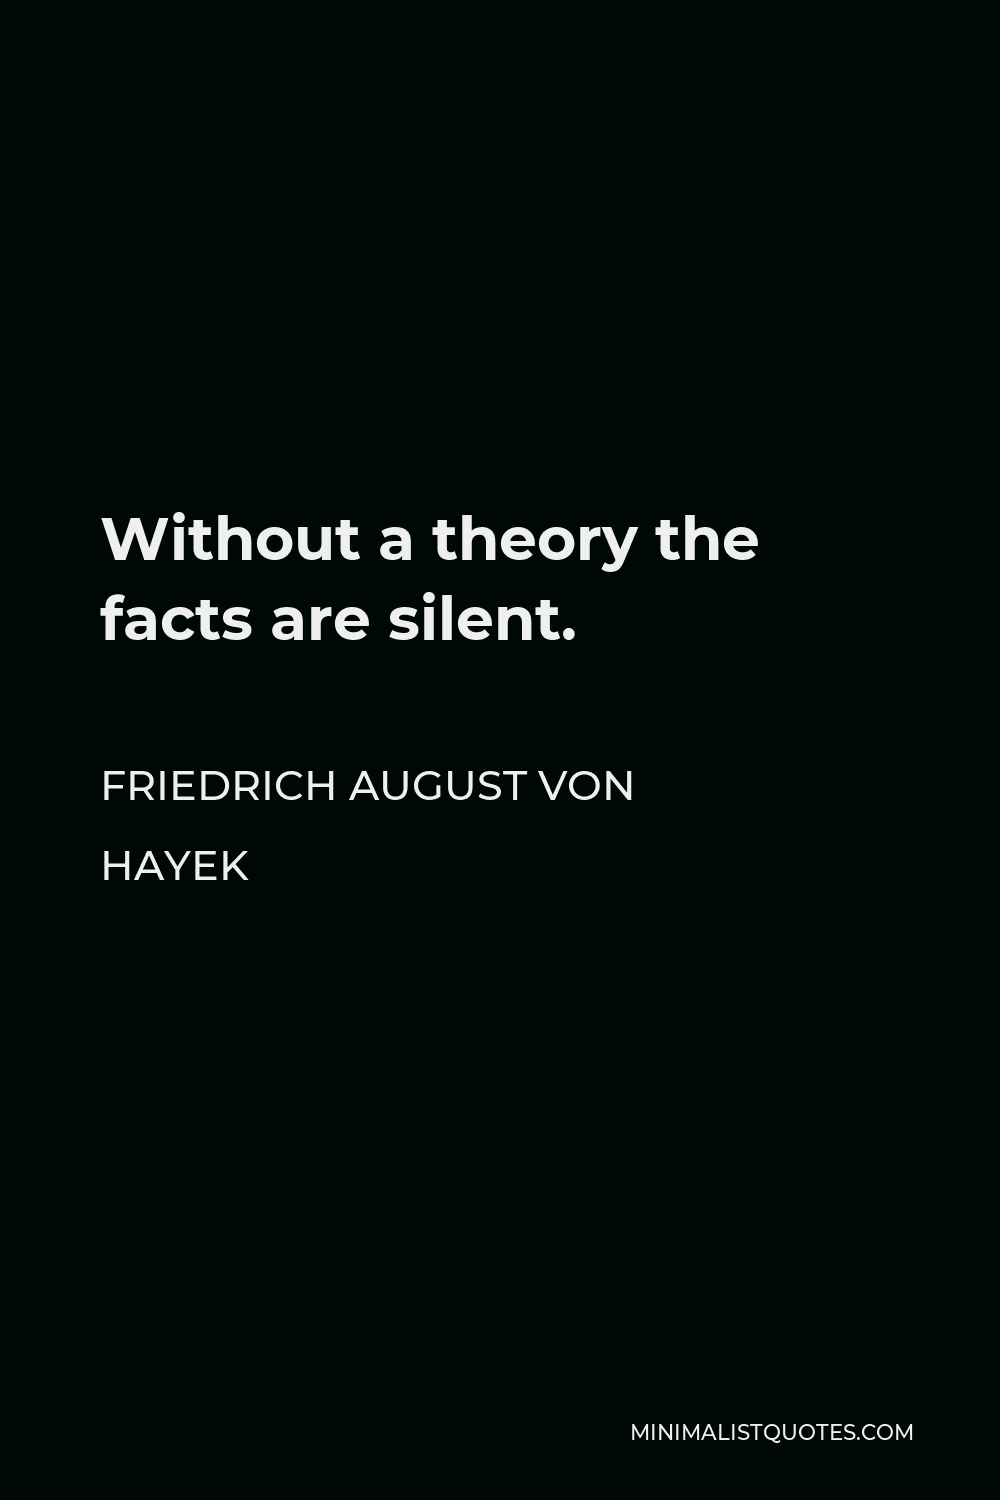 Friedrich August von Hayek Quote - Without a theory the facts are silent.